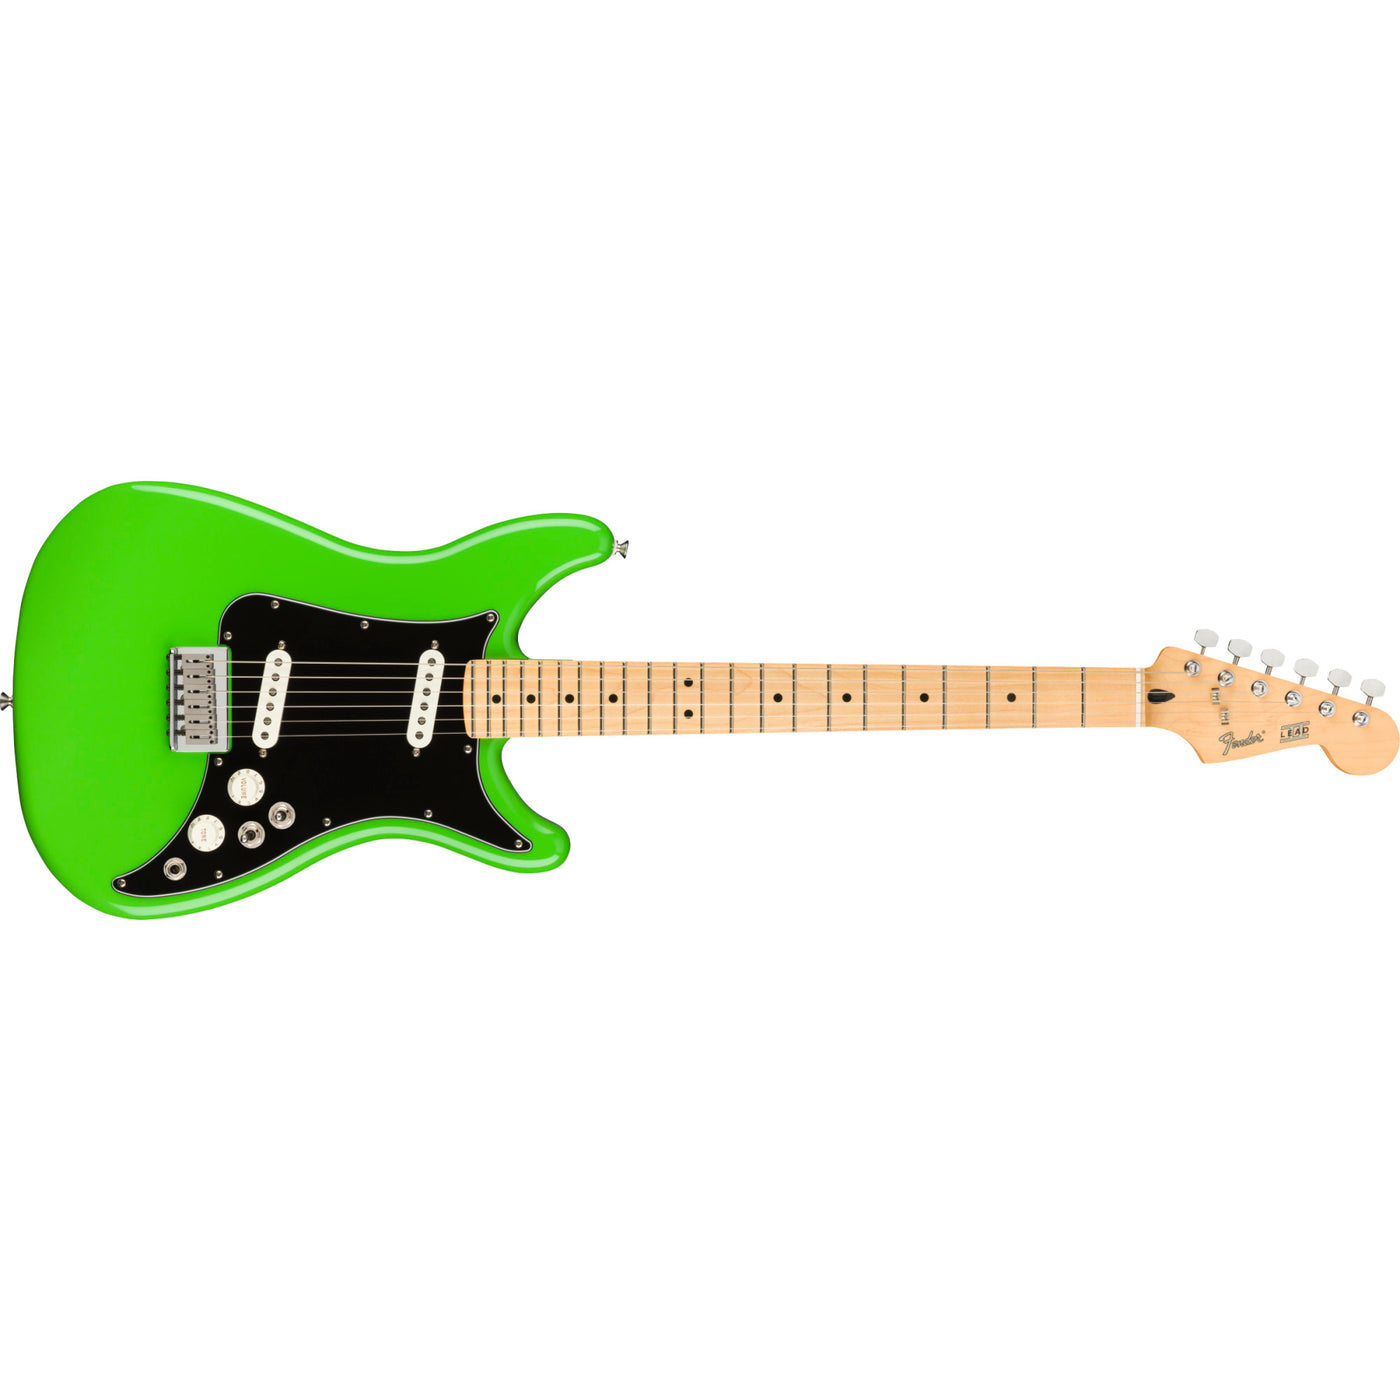 Fender Player Lead ll Electric Guitar, Neon Green (0144212525)